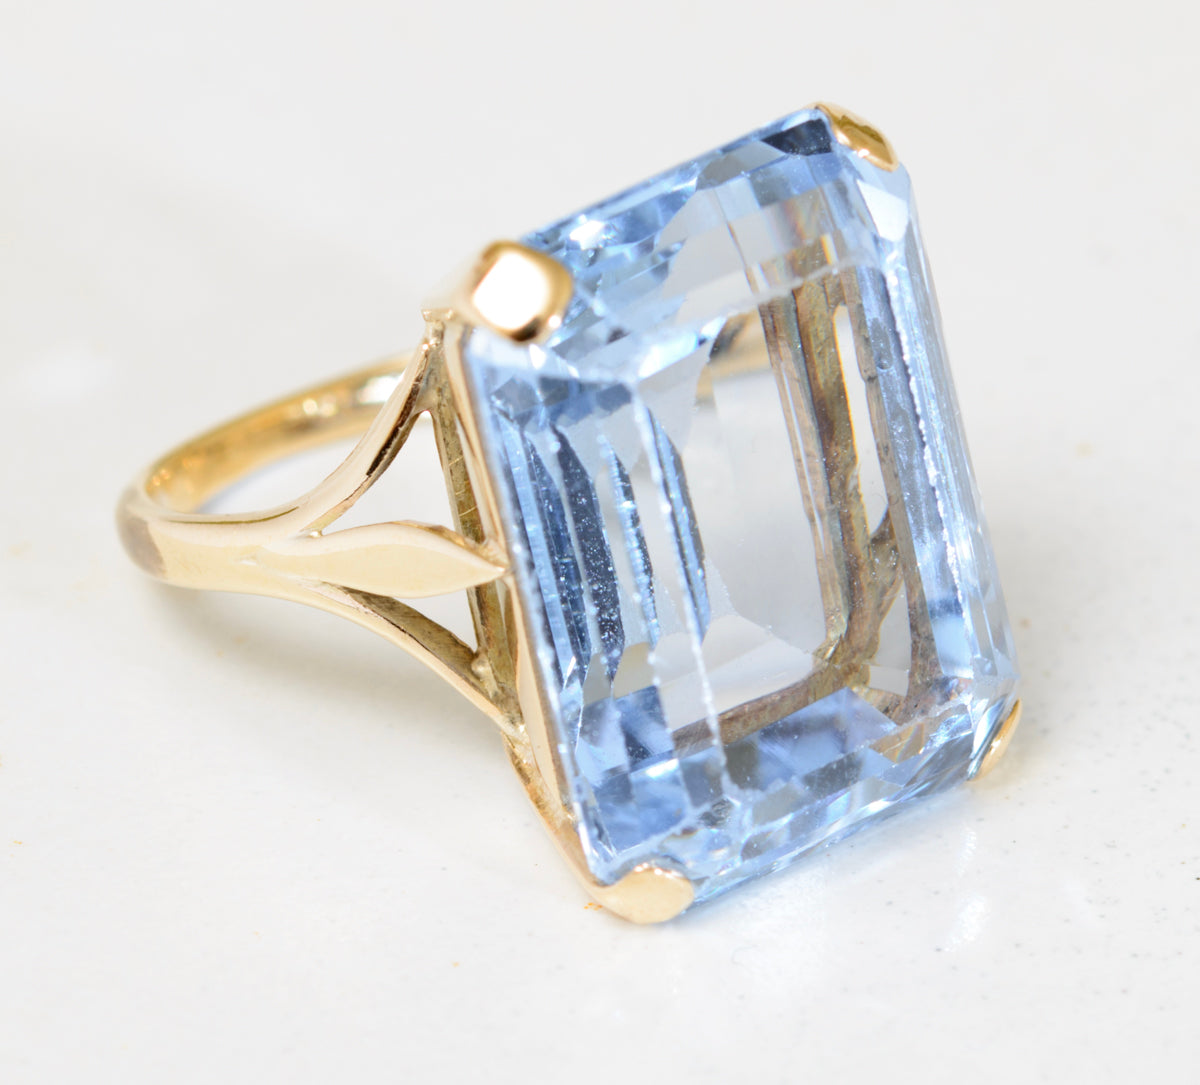 Vintage 9ct Gold Gemstone Ring With Huge 26 Carat Blue Spinel (Lab Created) (A1776)